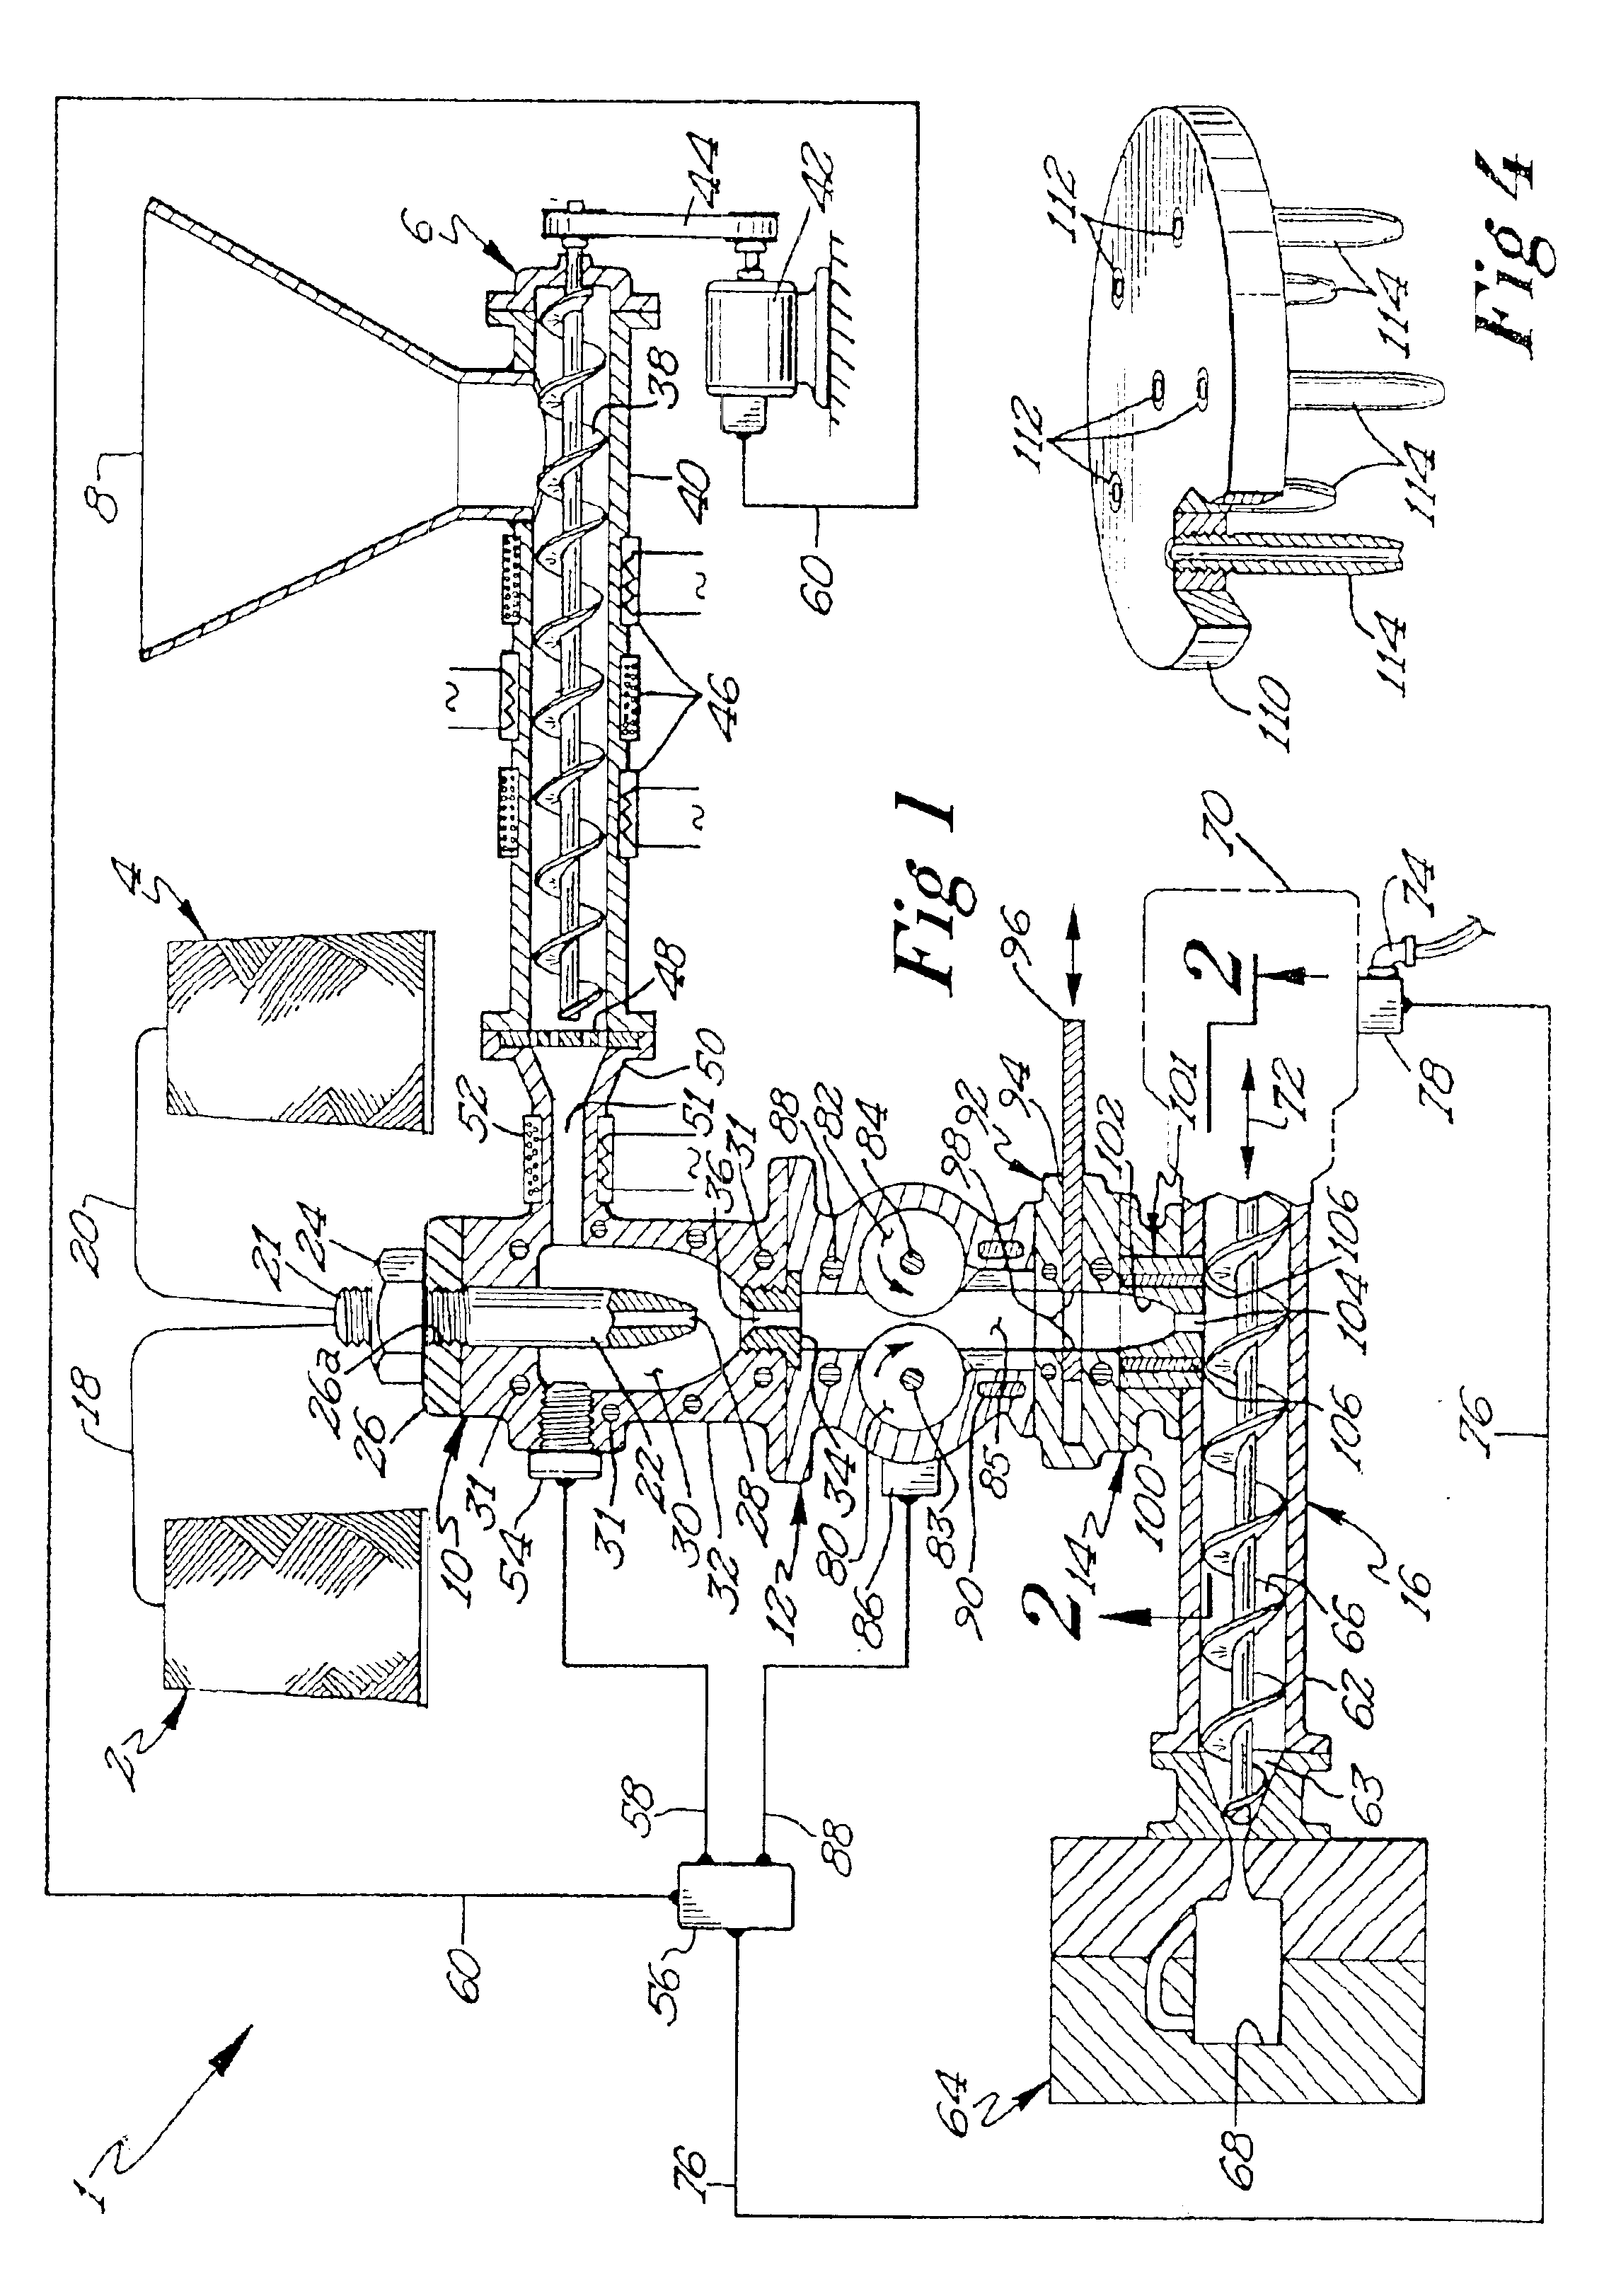 Method of compounding resin and fiber